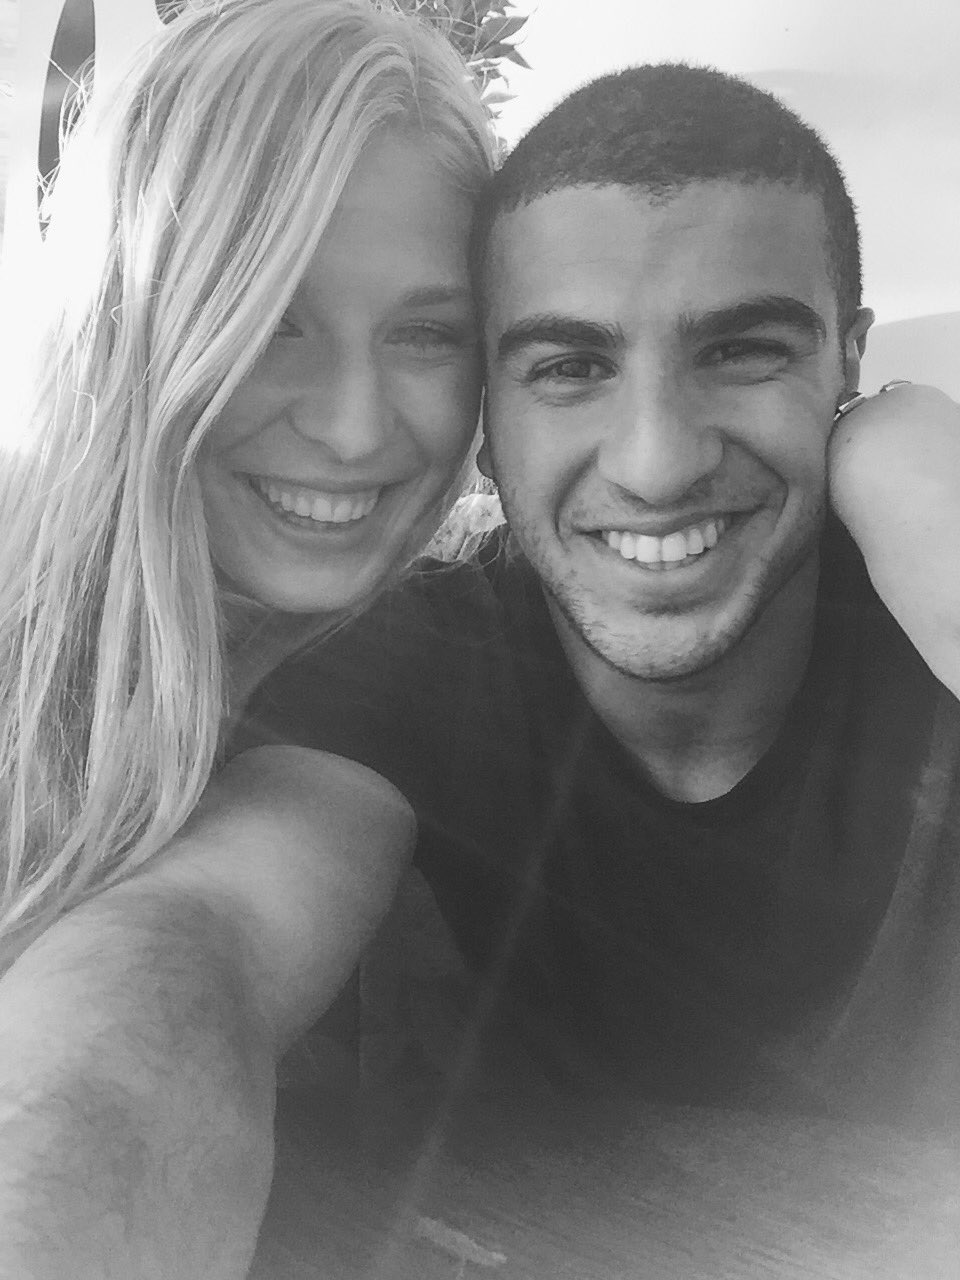 Adam Gemili On Twitter Wanna Wish A Massive Happy Birthday To My Amazing Girlfriend Hannahlloyd03 Can T Wait For Her To Be Home Https T Co 4lqclhjuiu